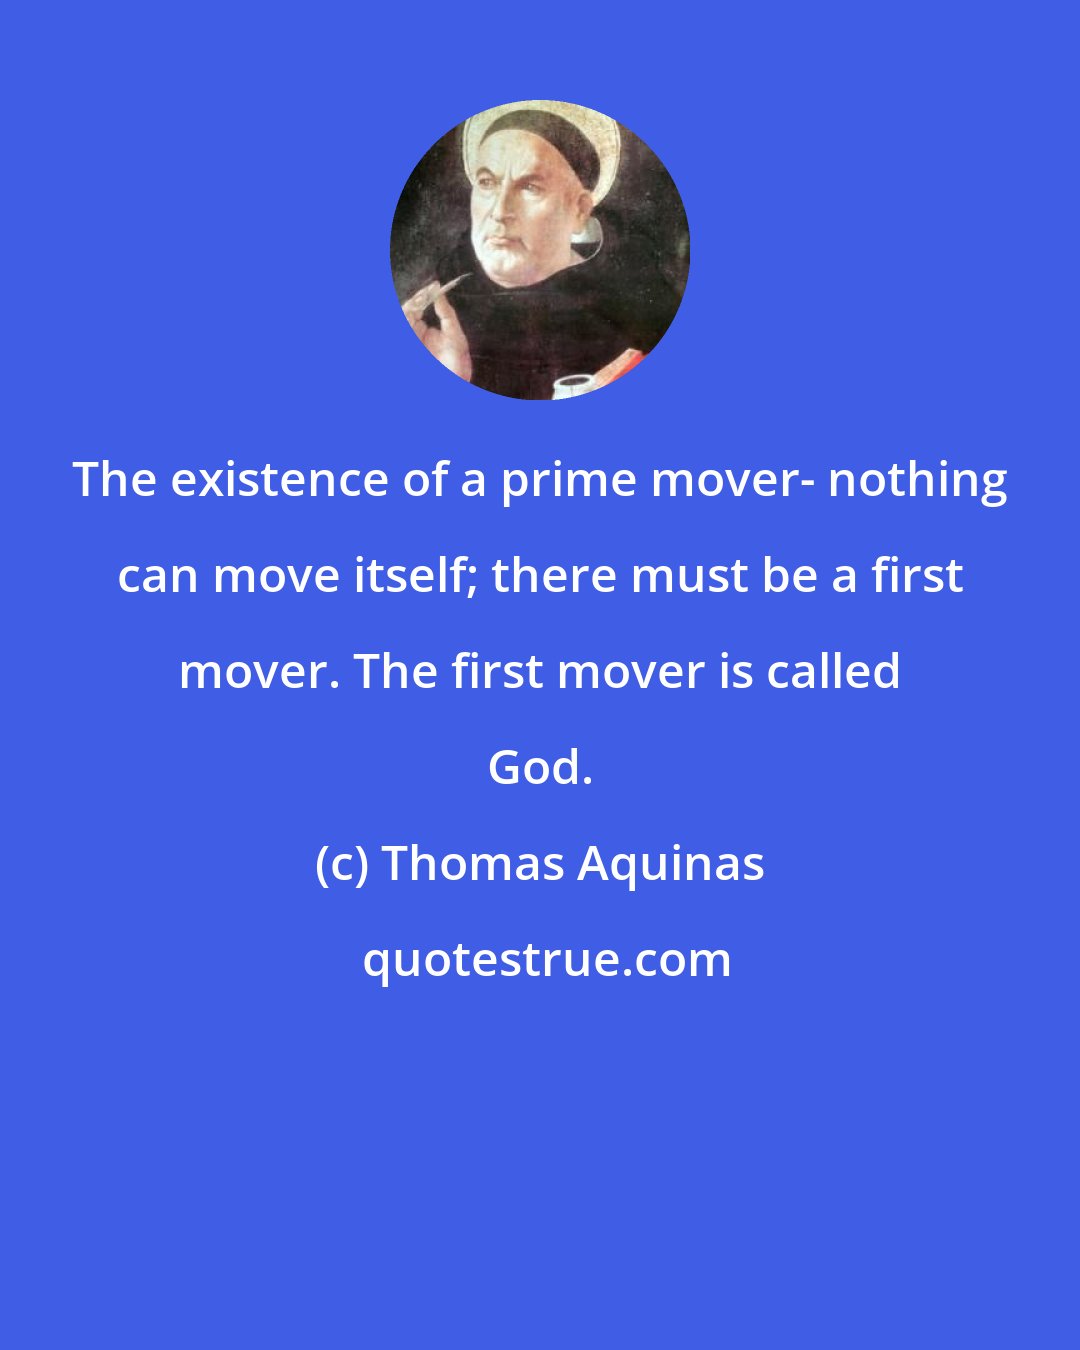 Thomas Aquinas: The existence of a prime mover- nothing can move itself; there must be a first mover. The first mover is called God.